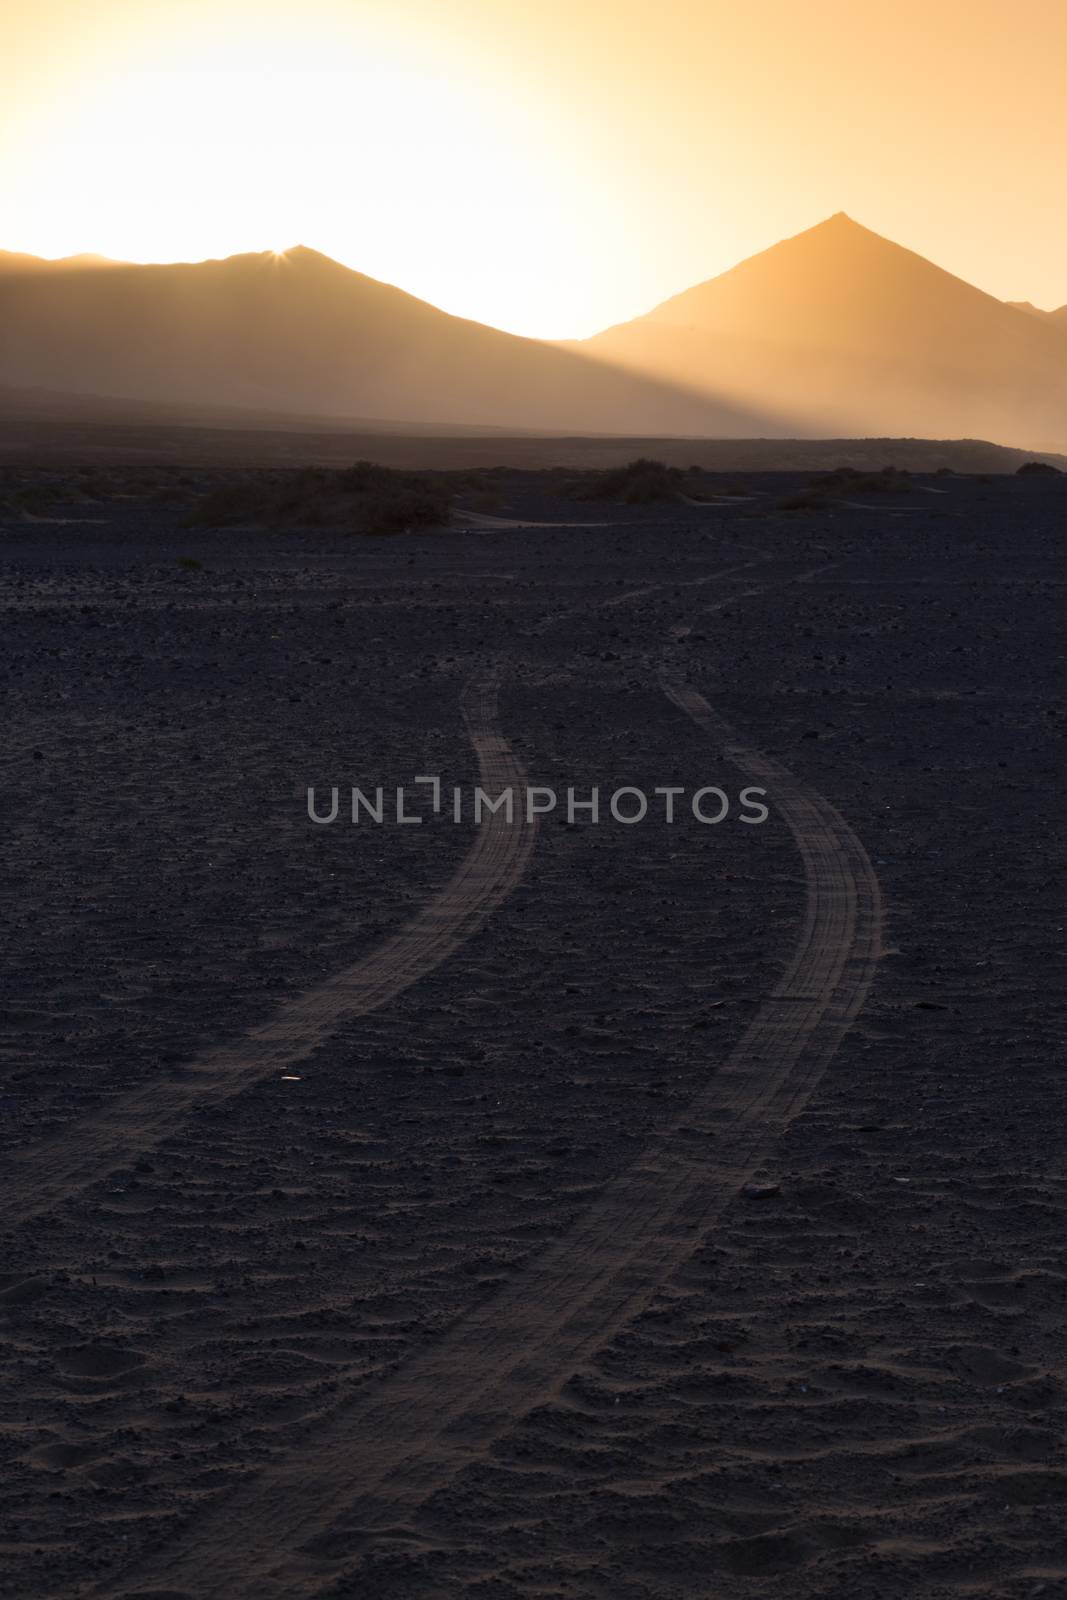 Car tire tracks in sand. Dirt road vanishing to the mountains sunlit in sunset. Copy space for text. Vertical composition.